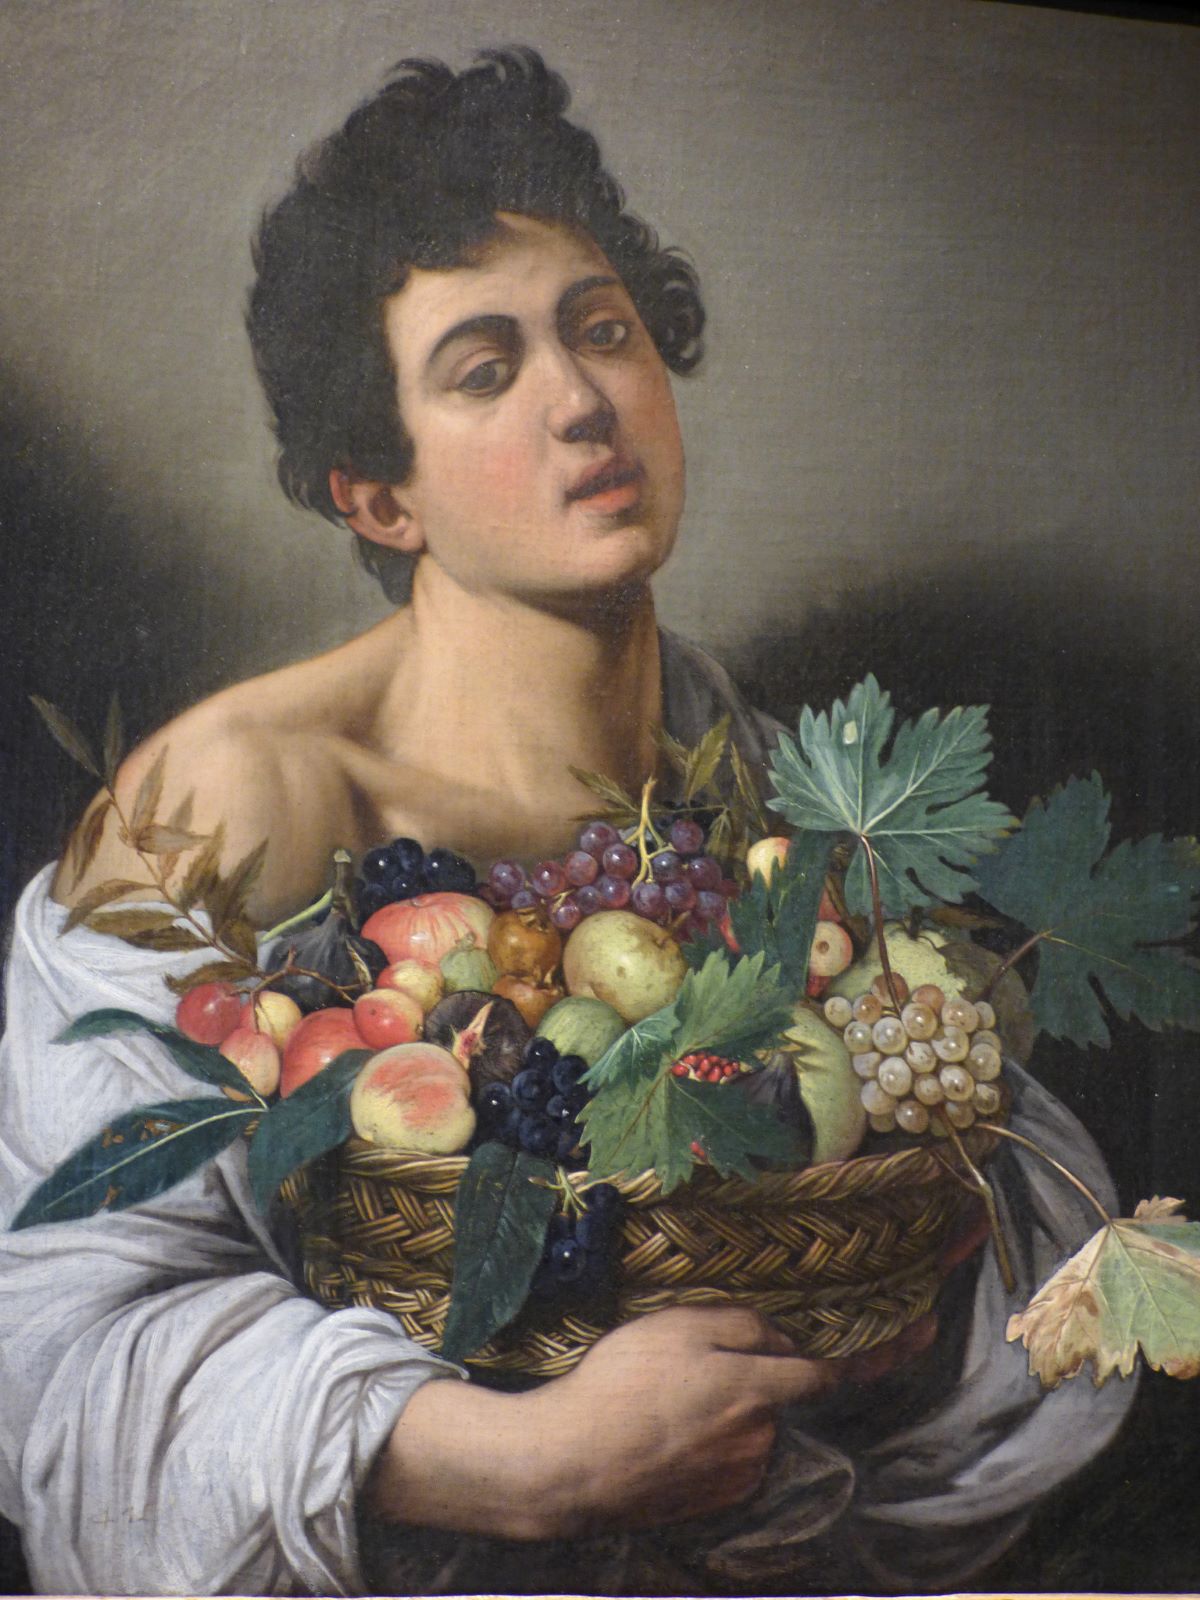  Boy-With-A-Basket-Of-Fruit-Caravaggio